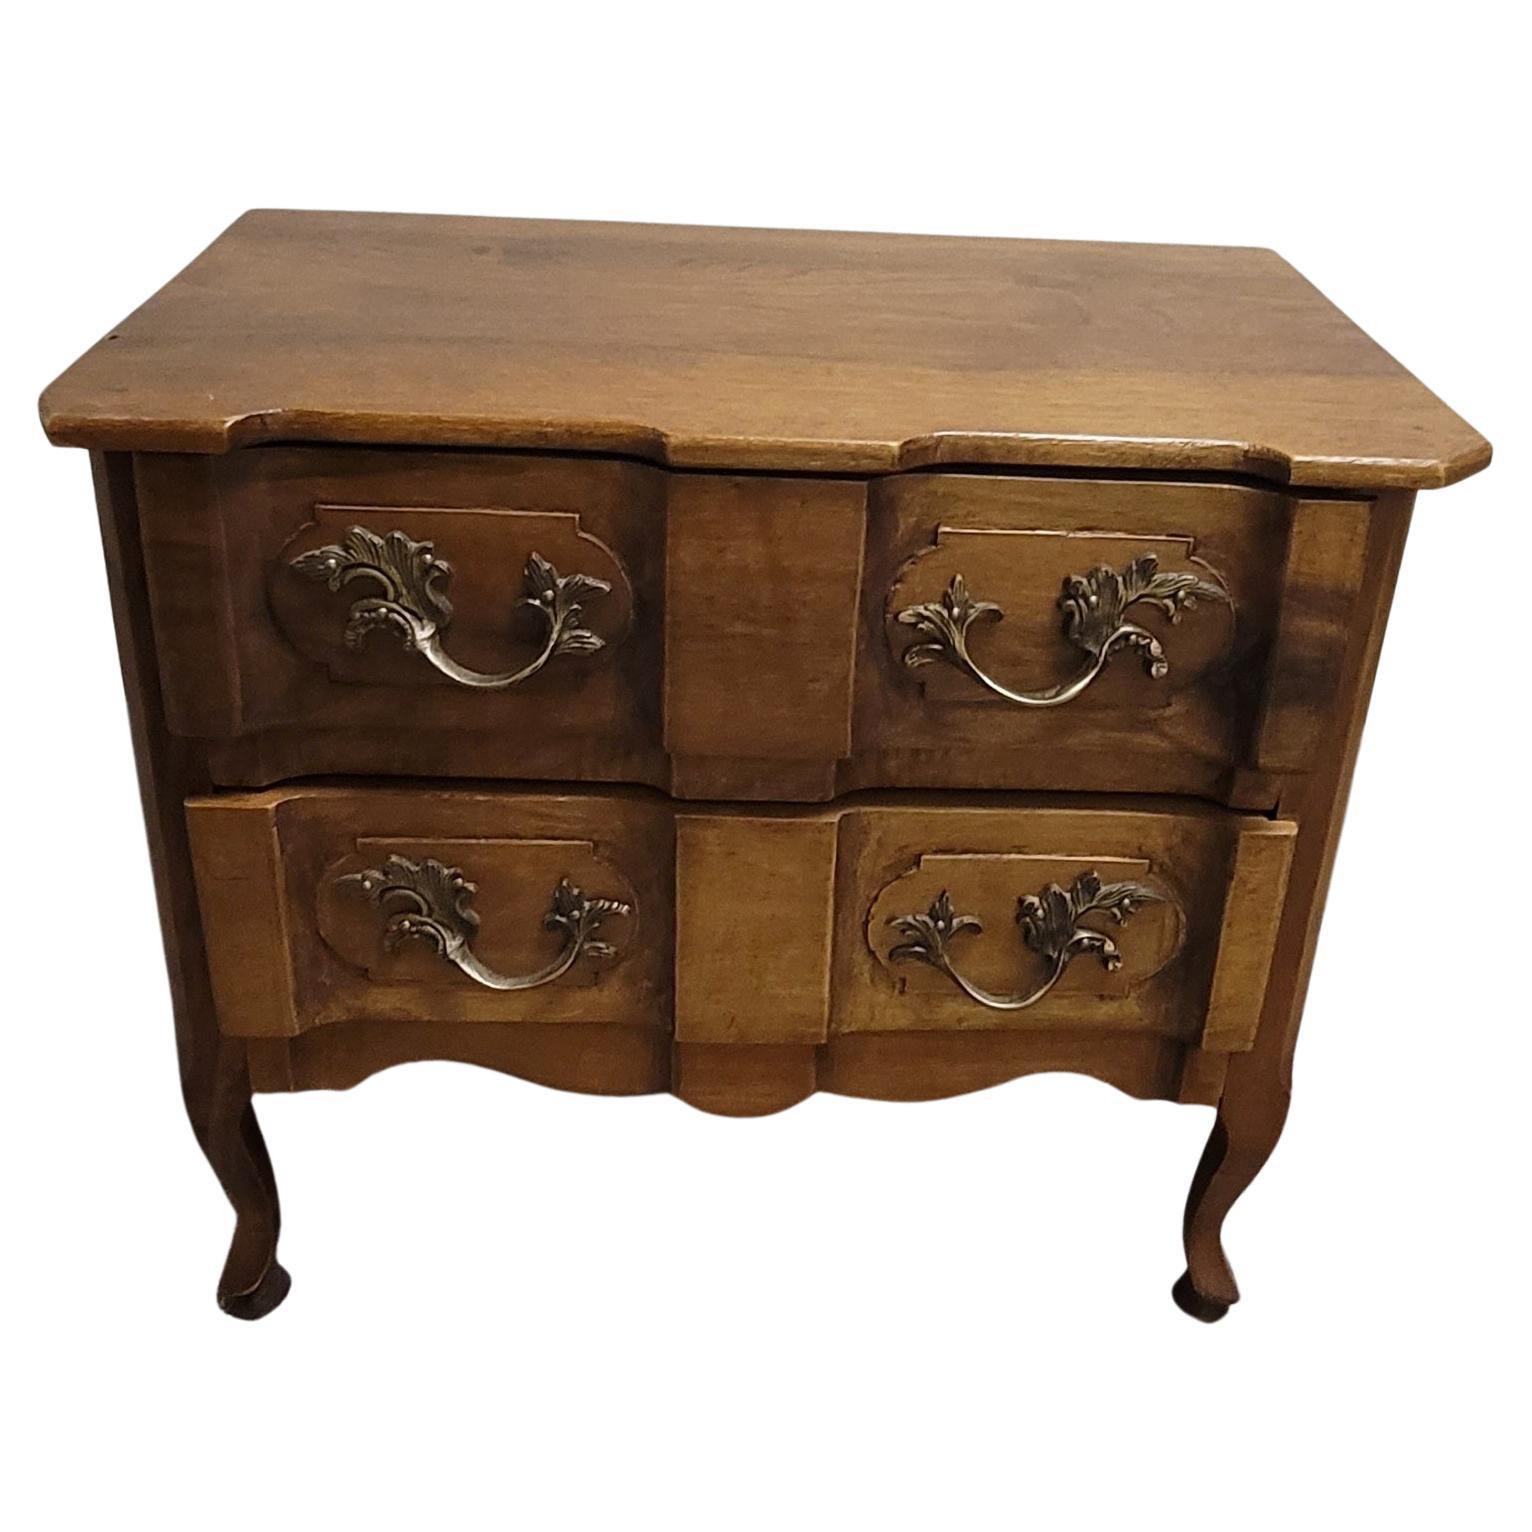 Hand-Crafted French Provincial Walnut Diminutive Commode w/ Hand-Rubbed Finish